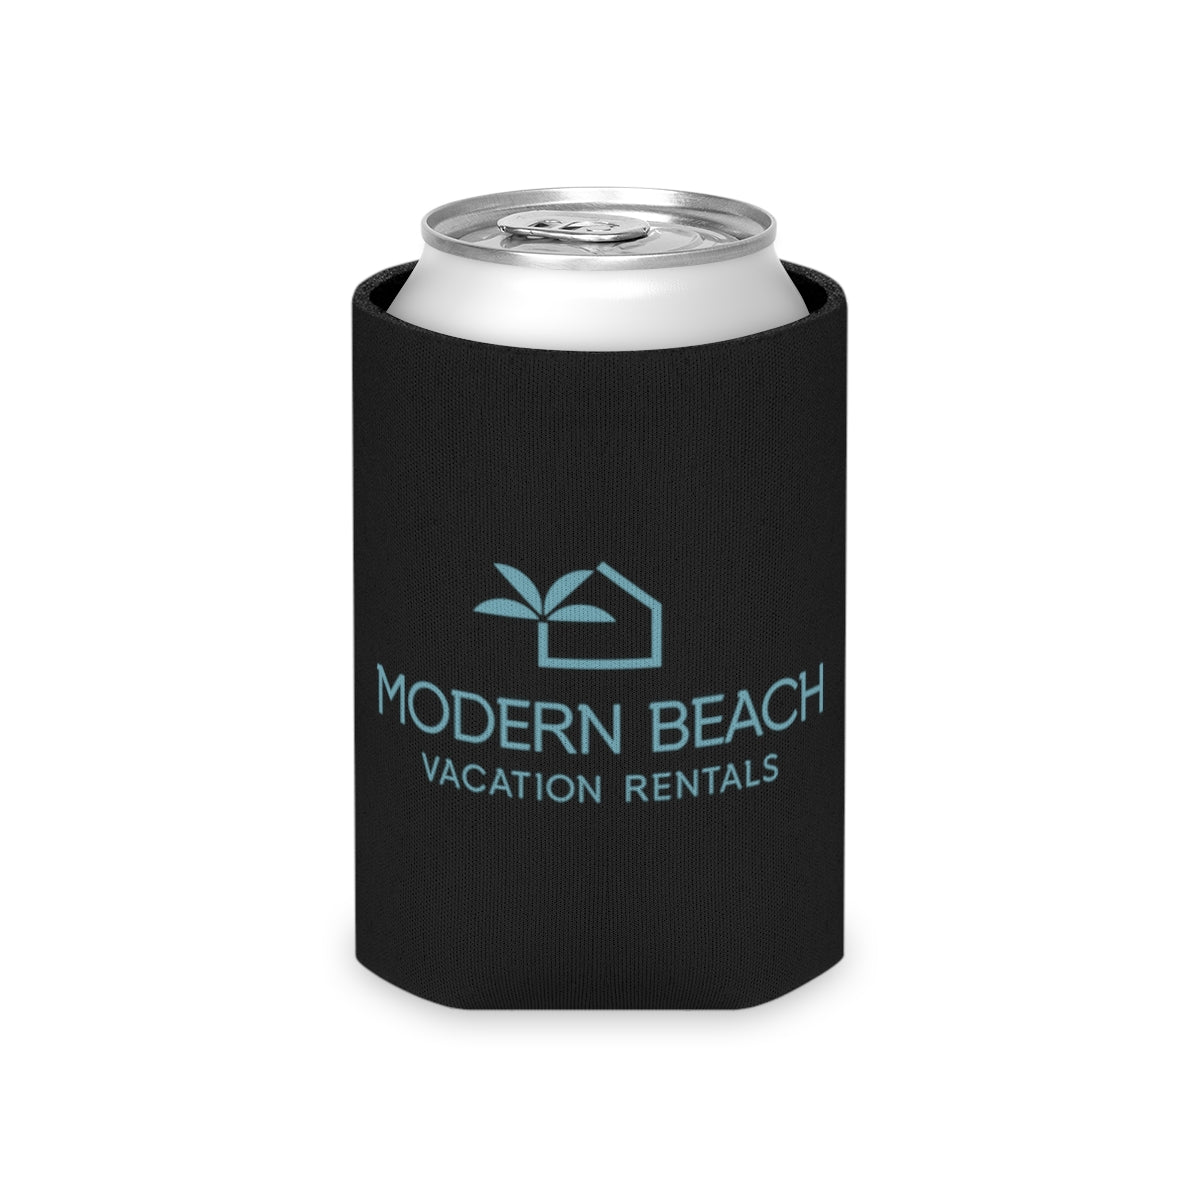 Modern Beach Vacation Rentals Basic Logo Black Can Coozie Cooler